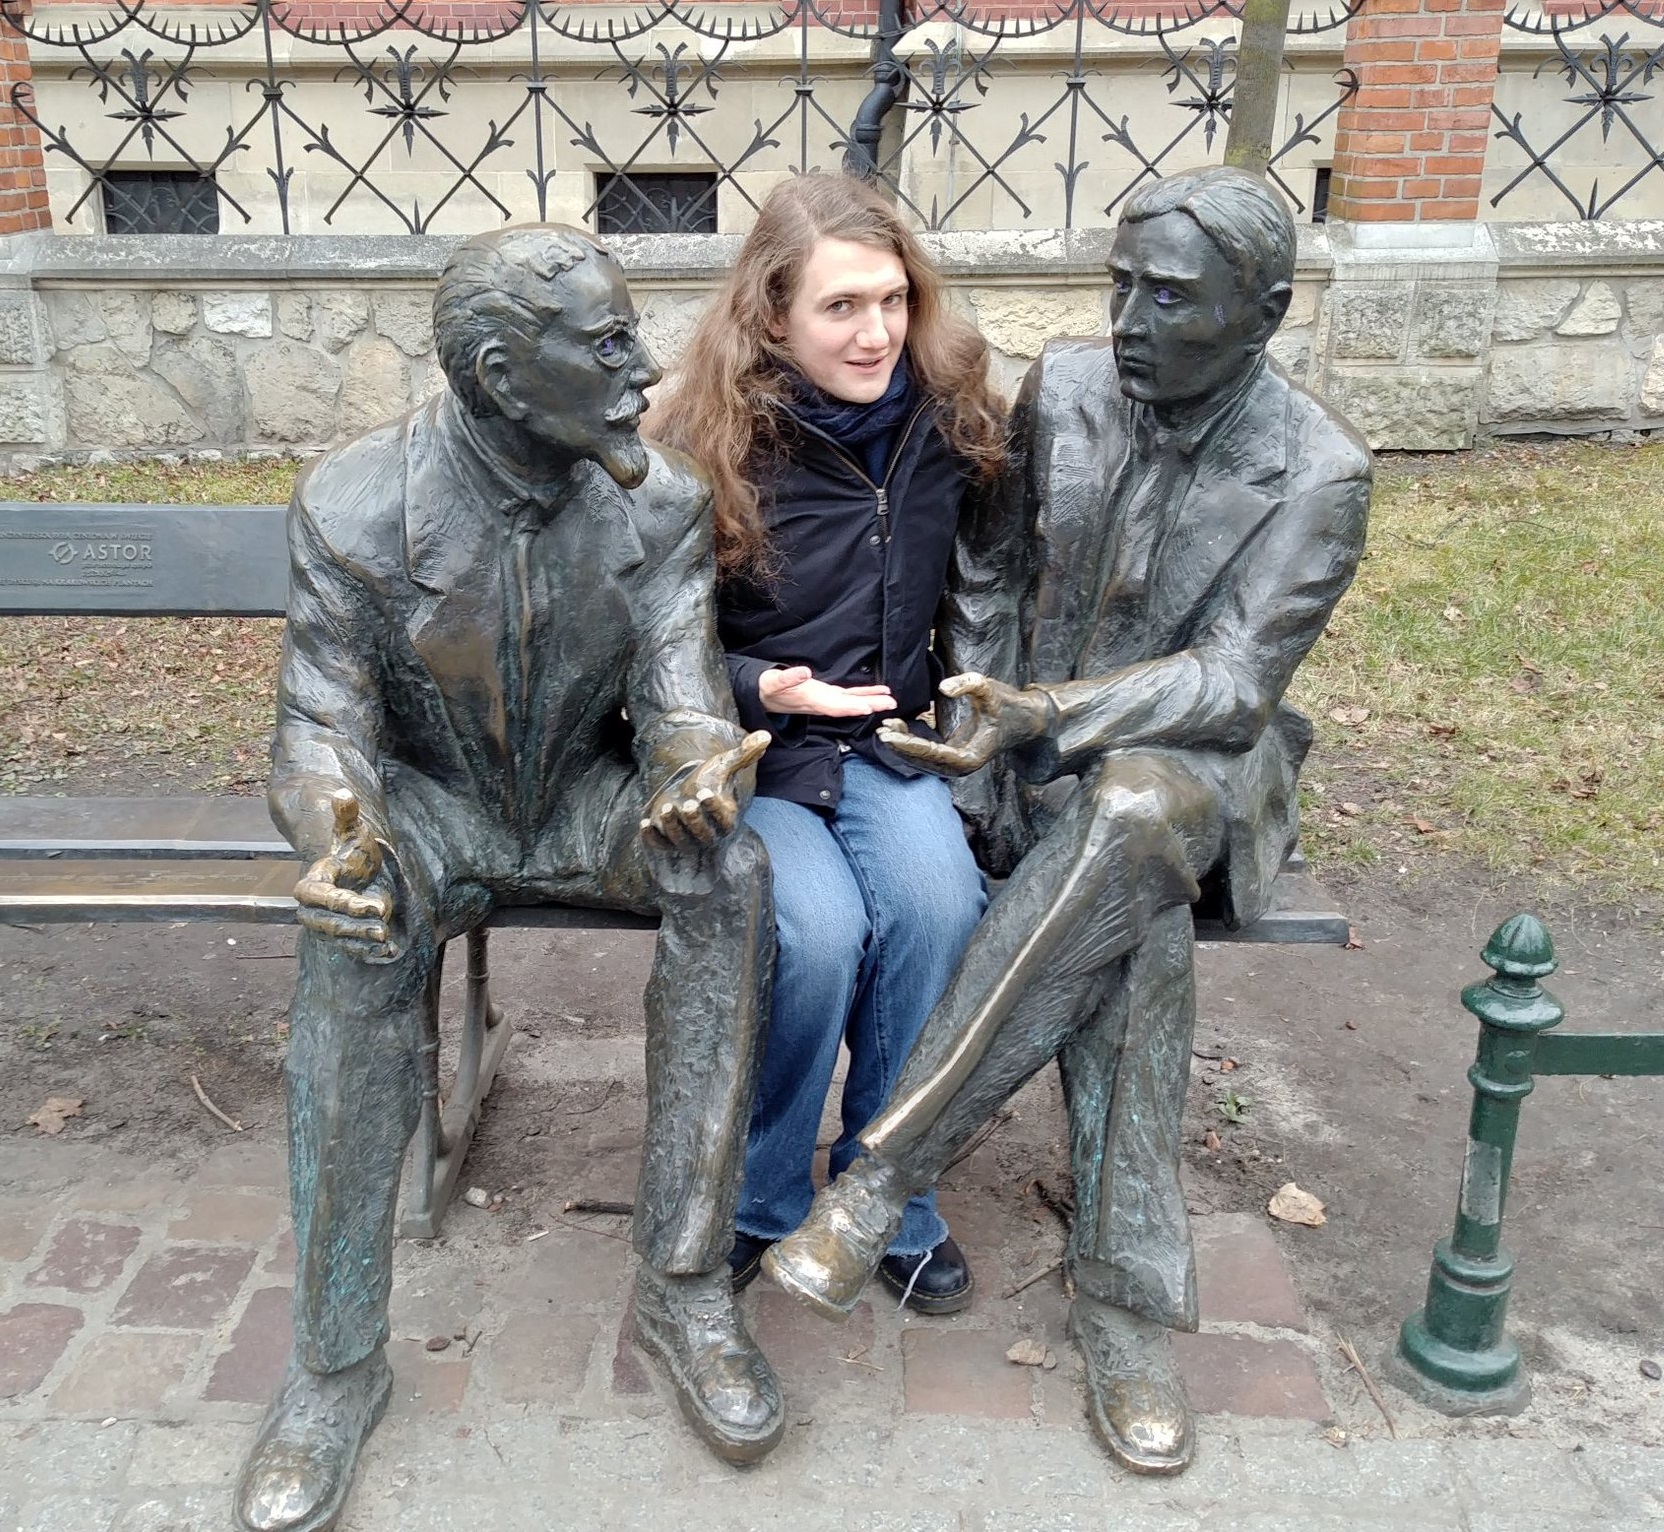 Picture of me sitting on a bench between statues of Banach and Nikodym, in Krakow.